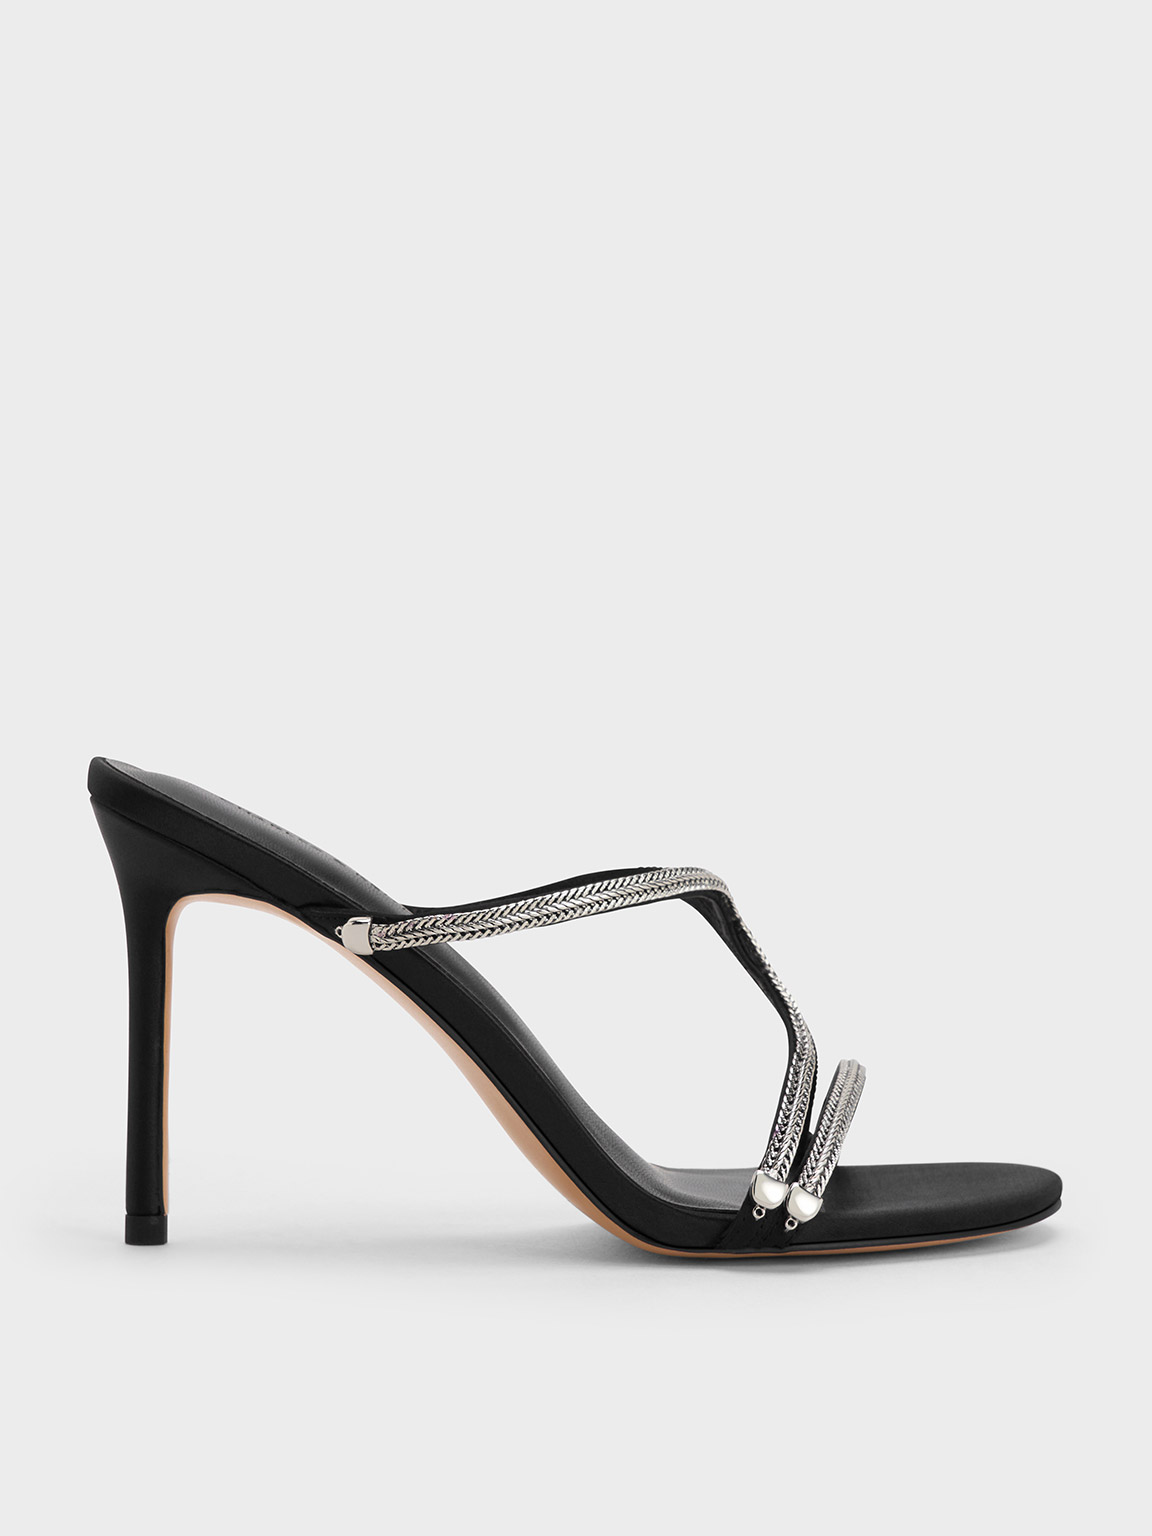 Black Textured Satin Braided Strappy Heeled Mules - CHARLES & KEITH SG